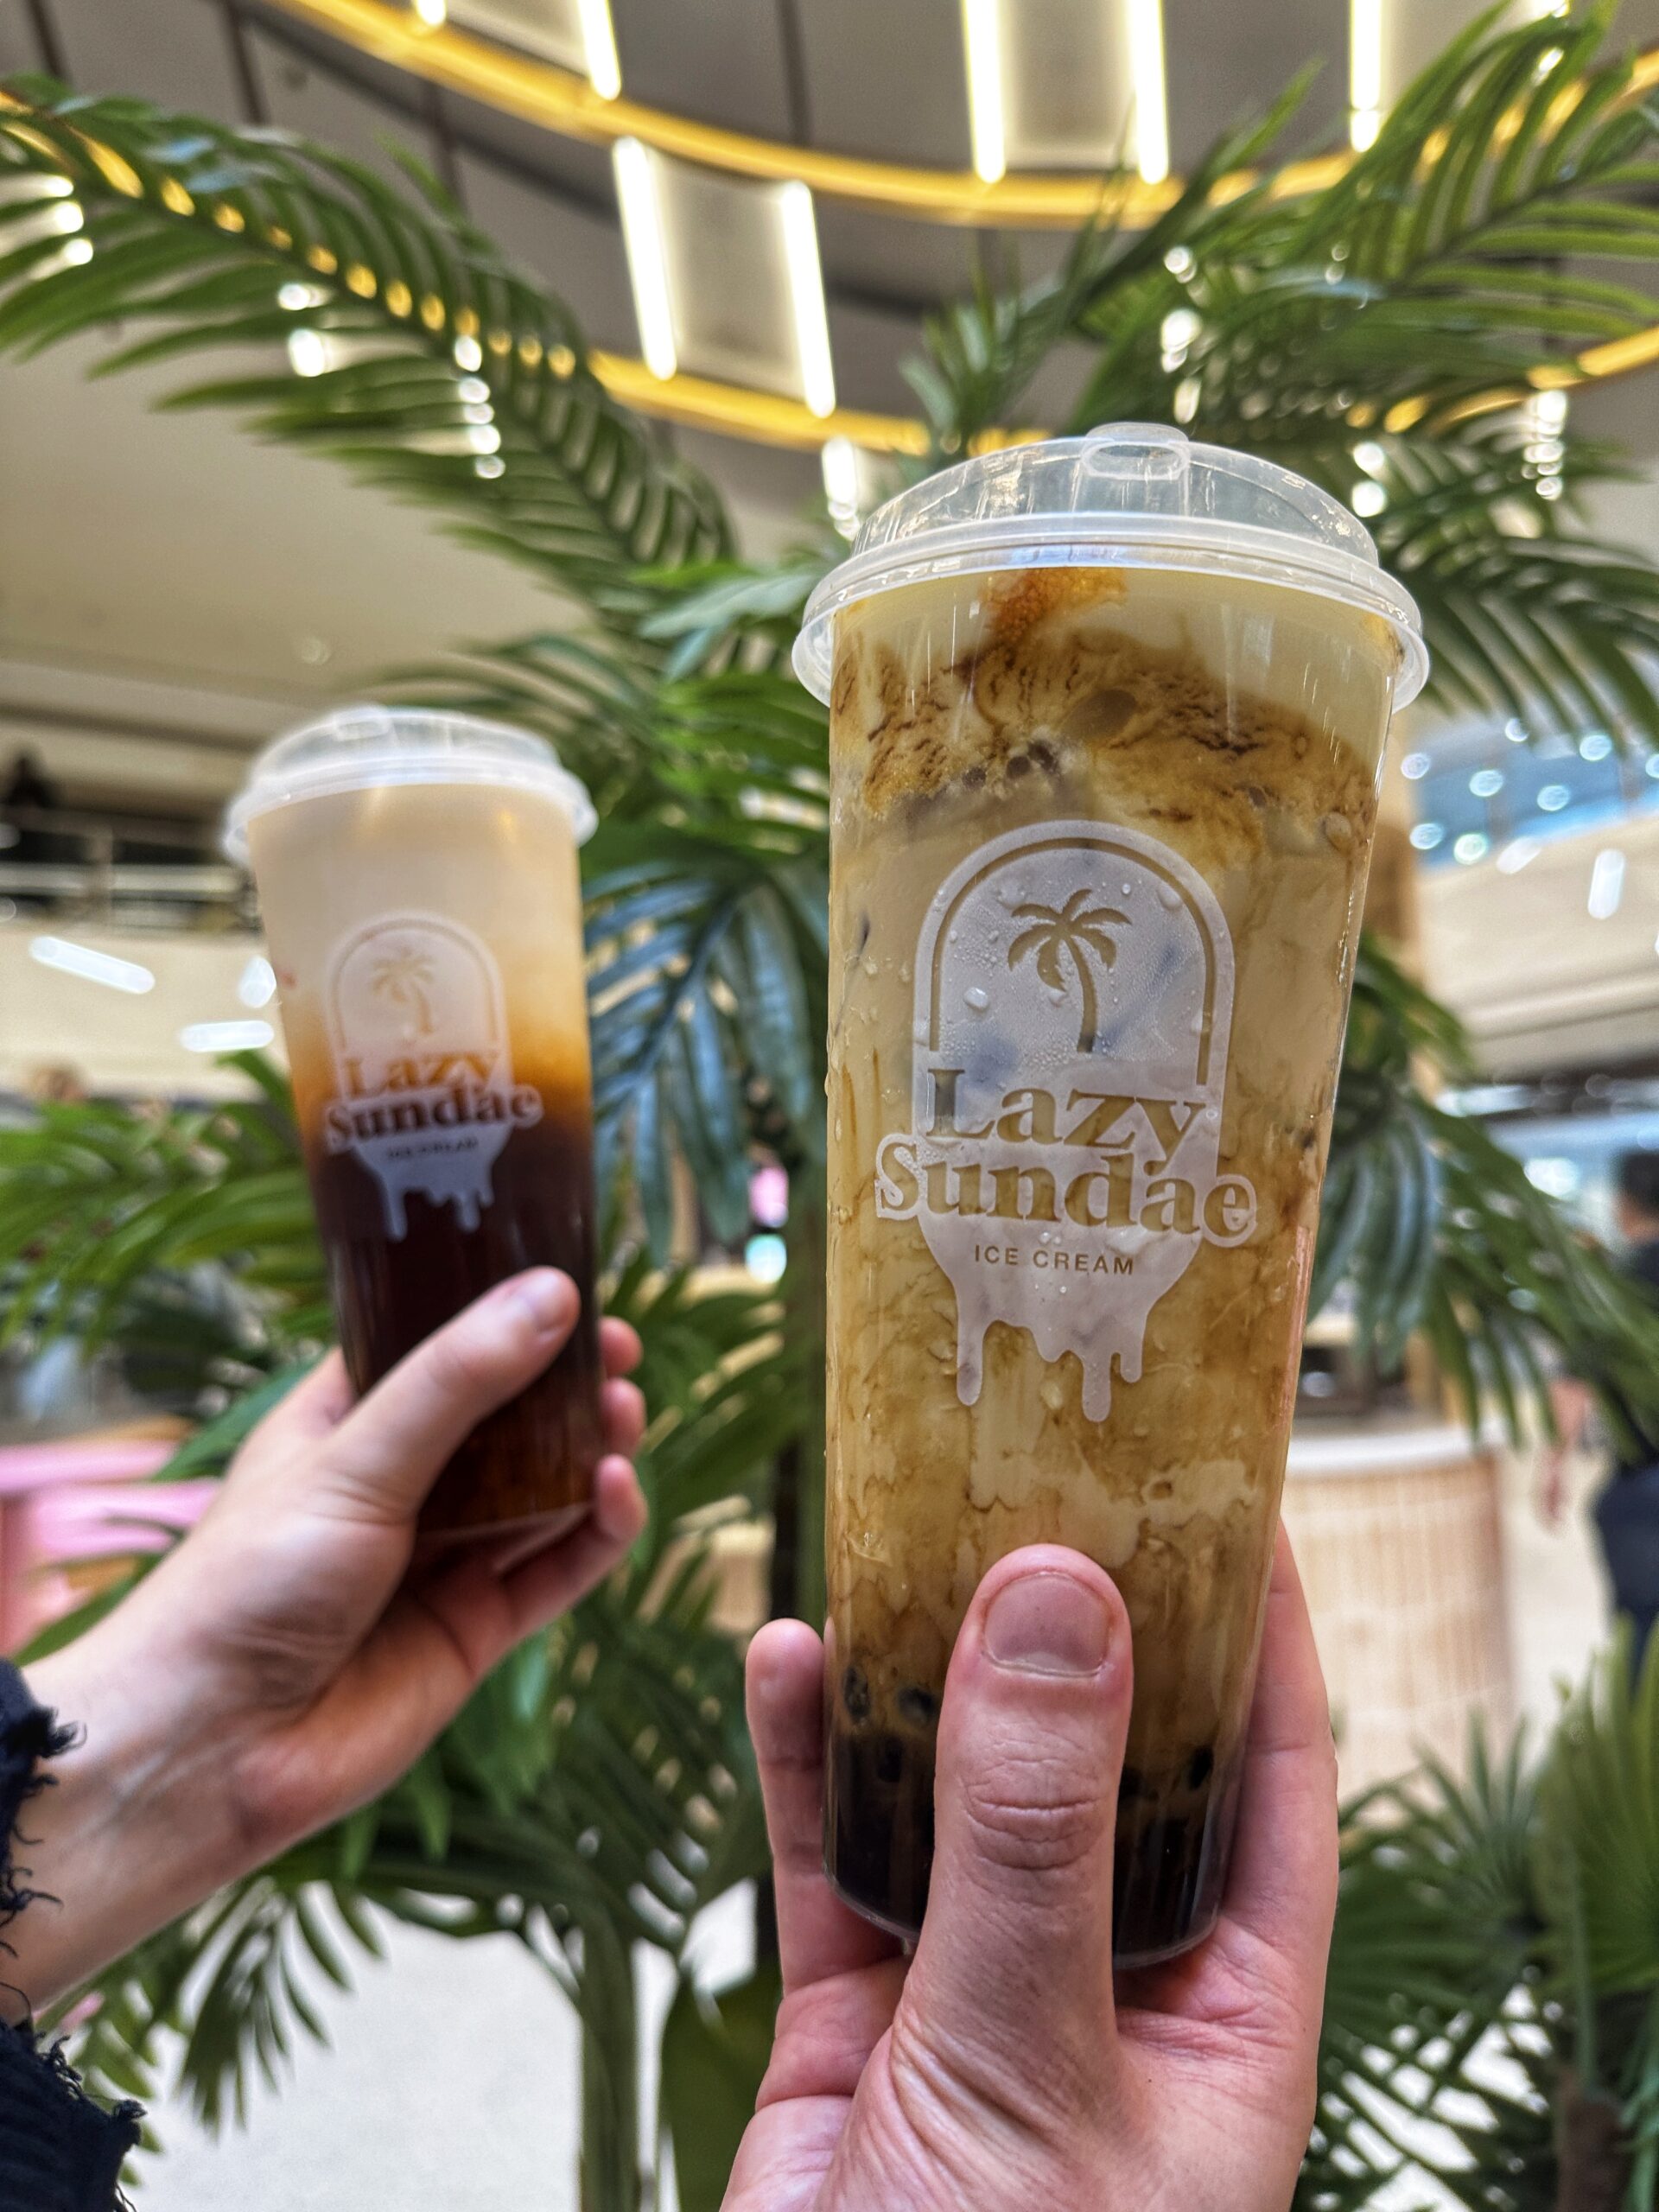 Lazy Sundae has opened a new ice cream parlour in the Manchester Arndale serving bubble and milk teas